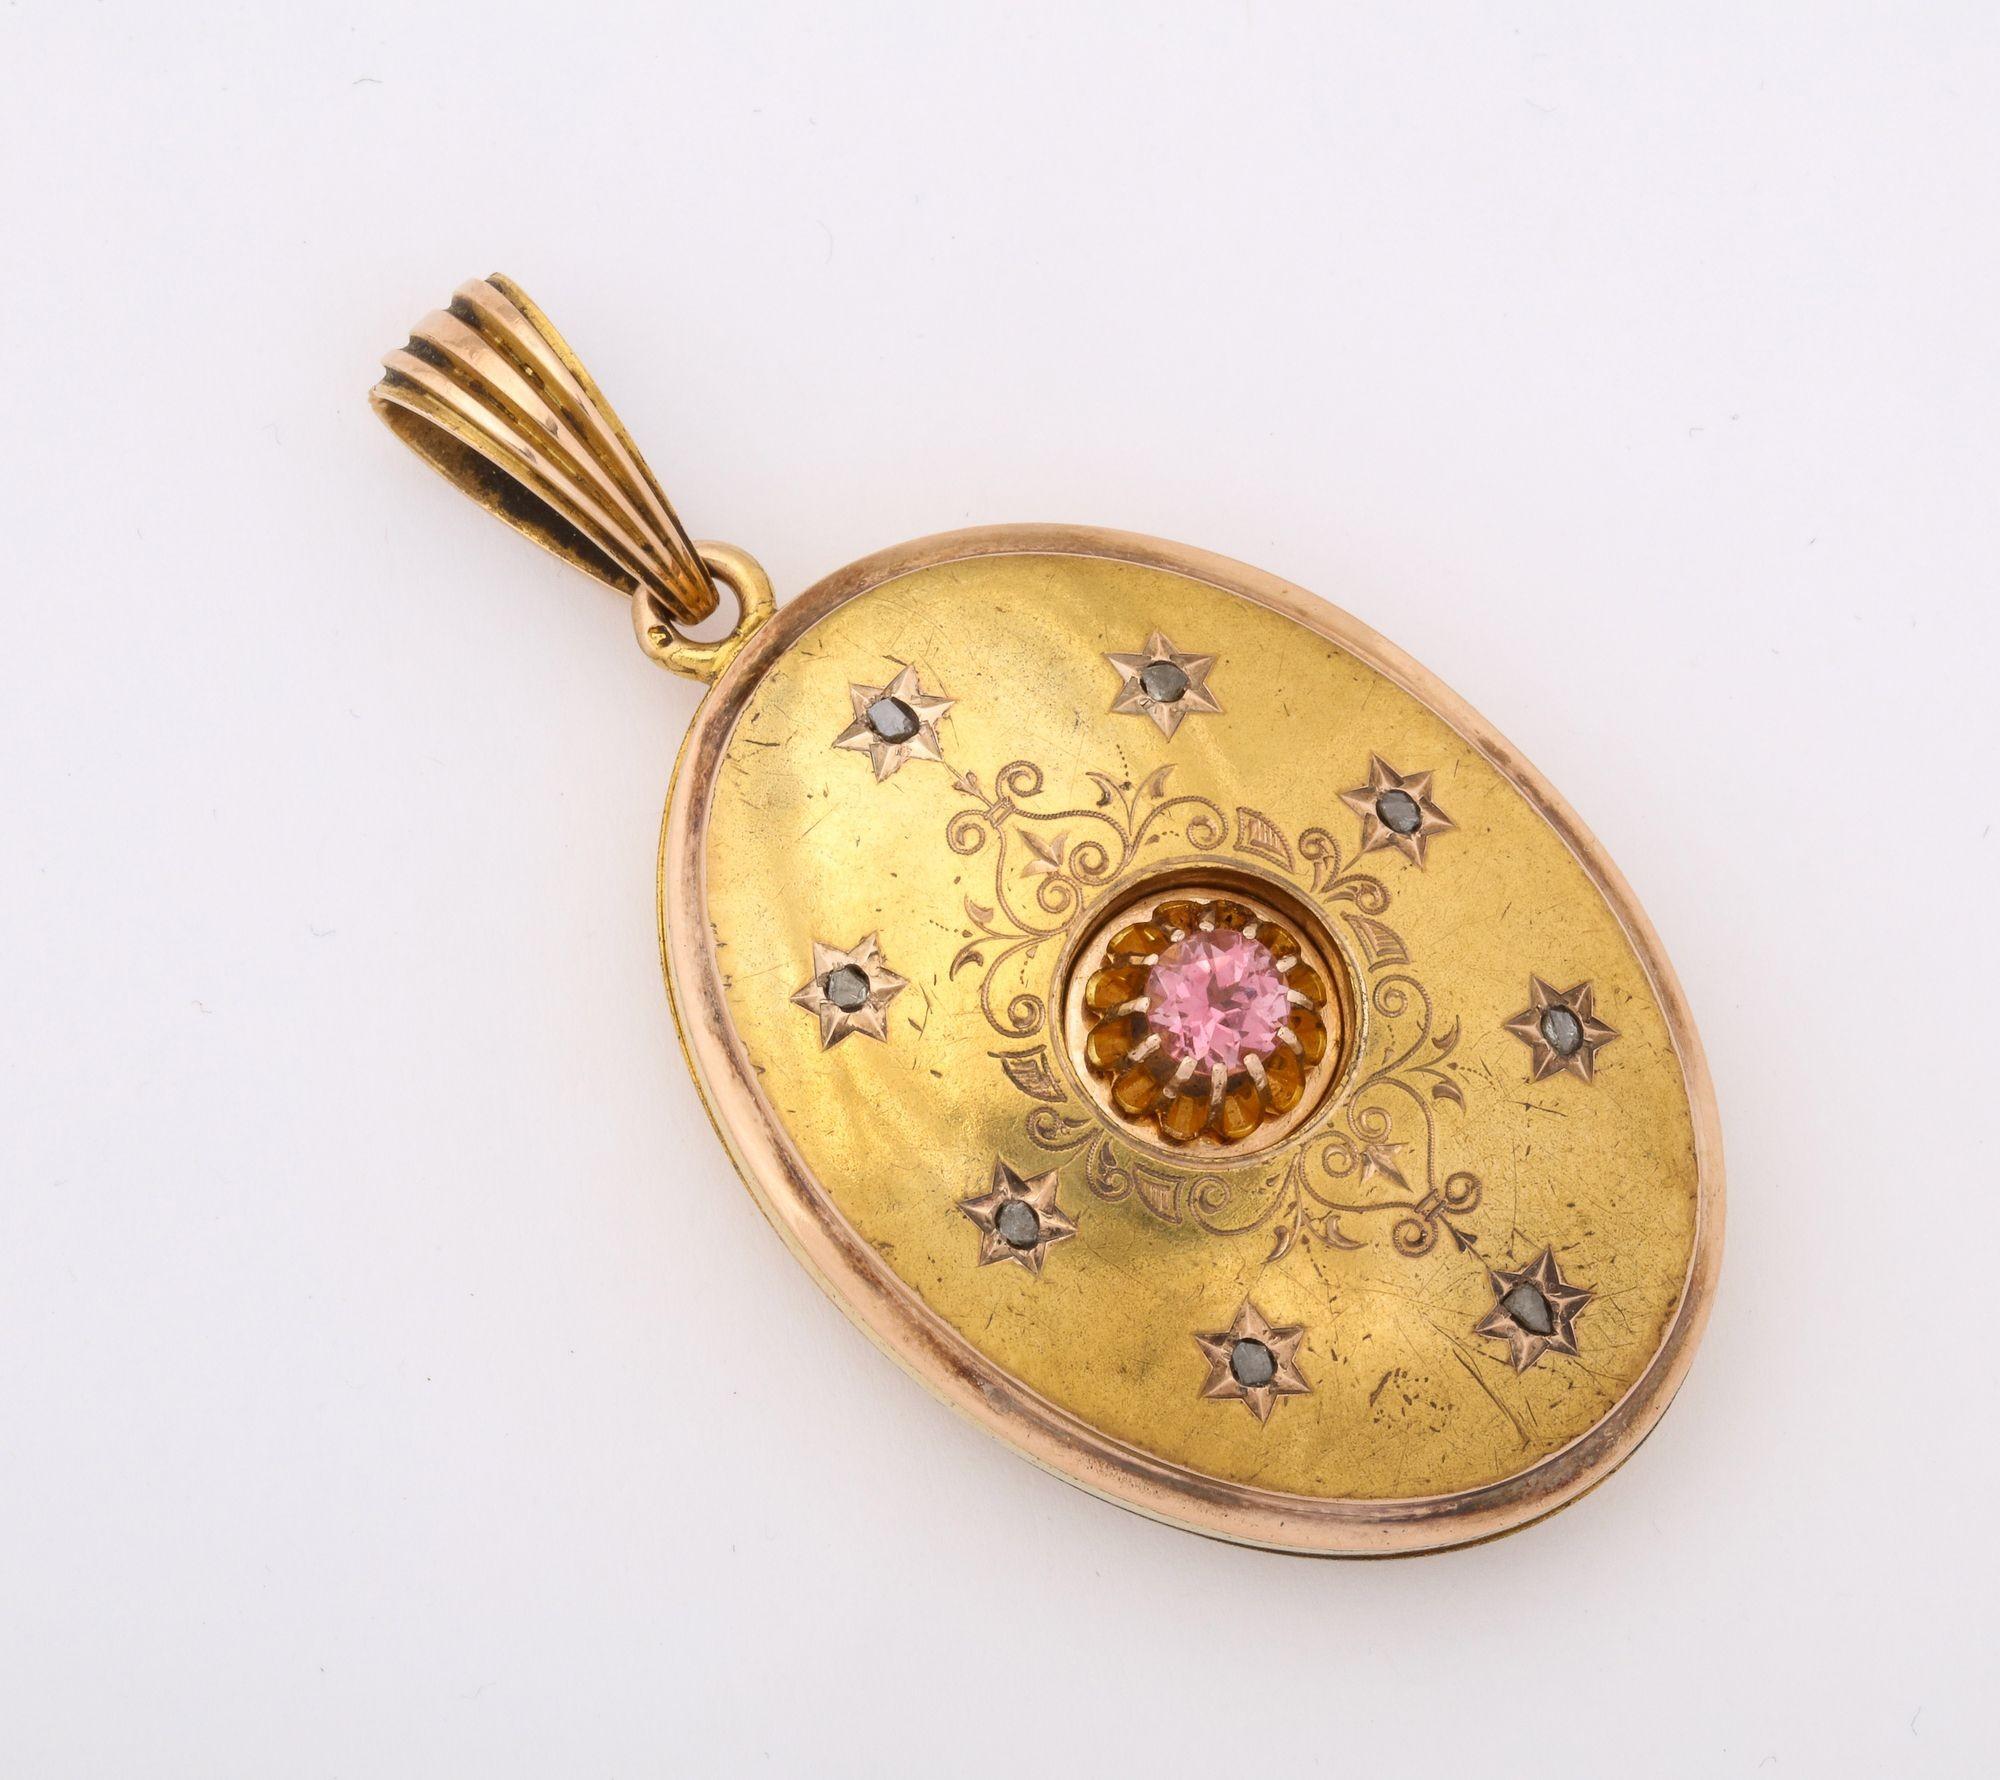 A wonderful Antique Gold Locket with inset rose diamonds,pink  tourmaline and chased decoration. Vienna gold touch marks..